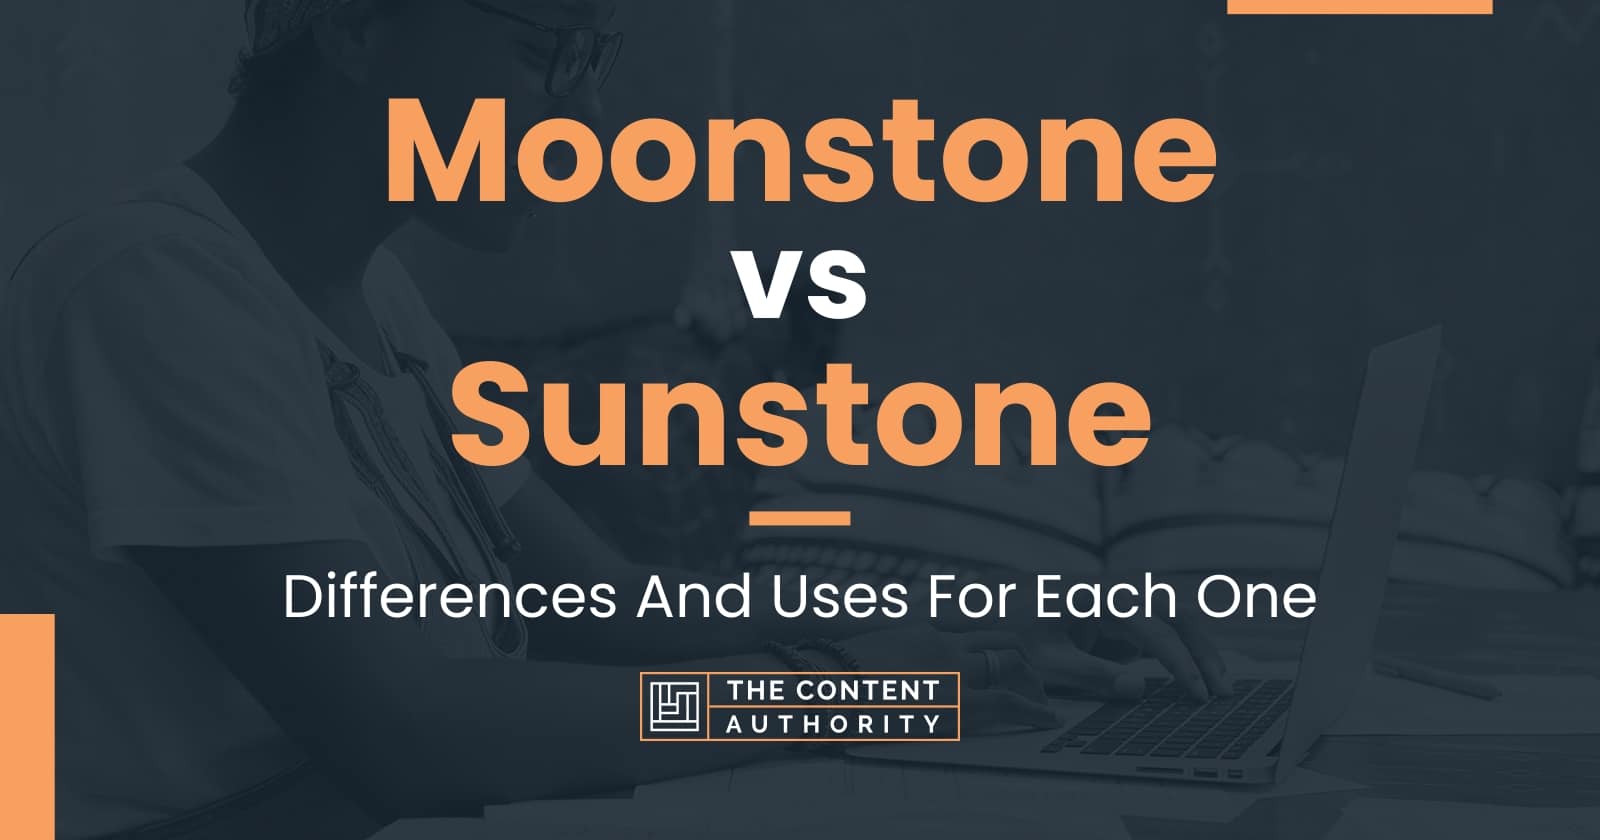 Moonstone vs Sunstone: Differences And Uses For Each One